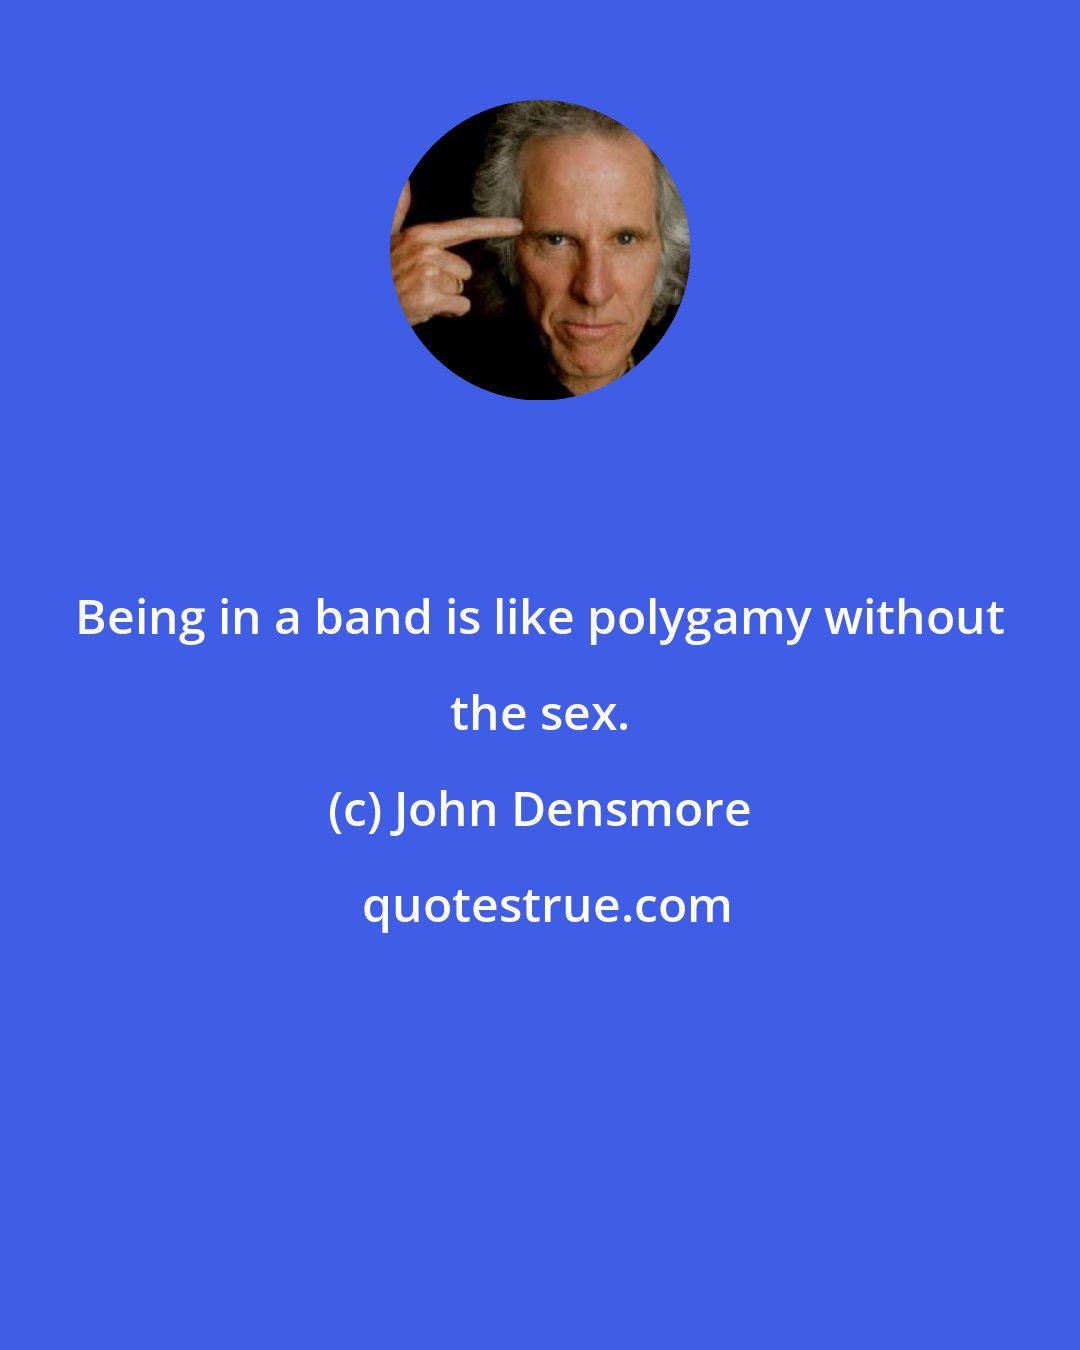 John Densmore: Being in a band is like polygamy without the sex.